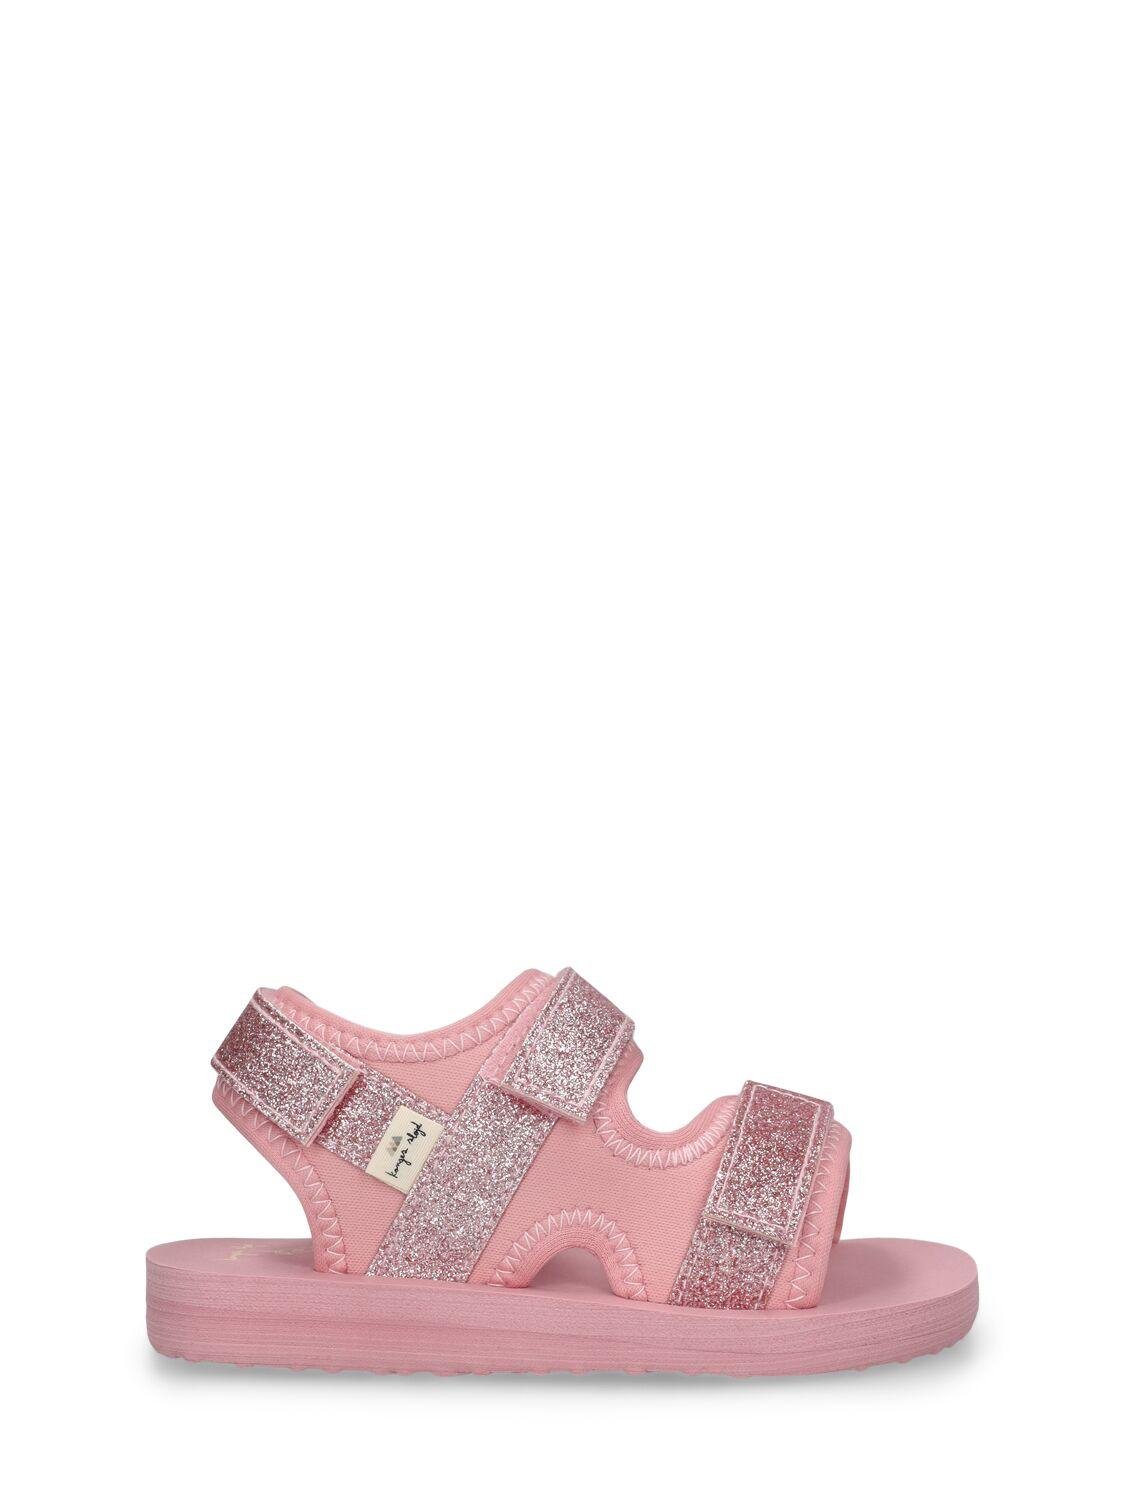 Glittered Rubber Sandals W/straps by KONGES SLOJD